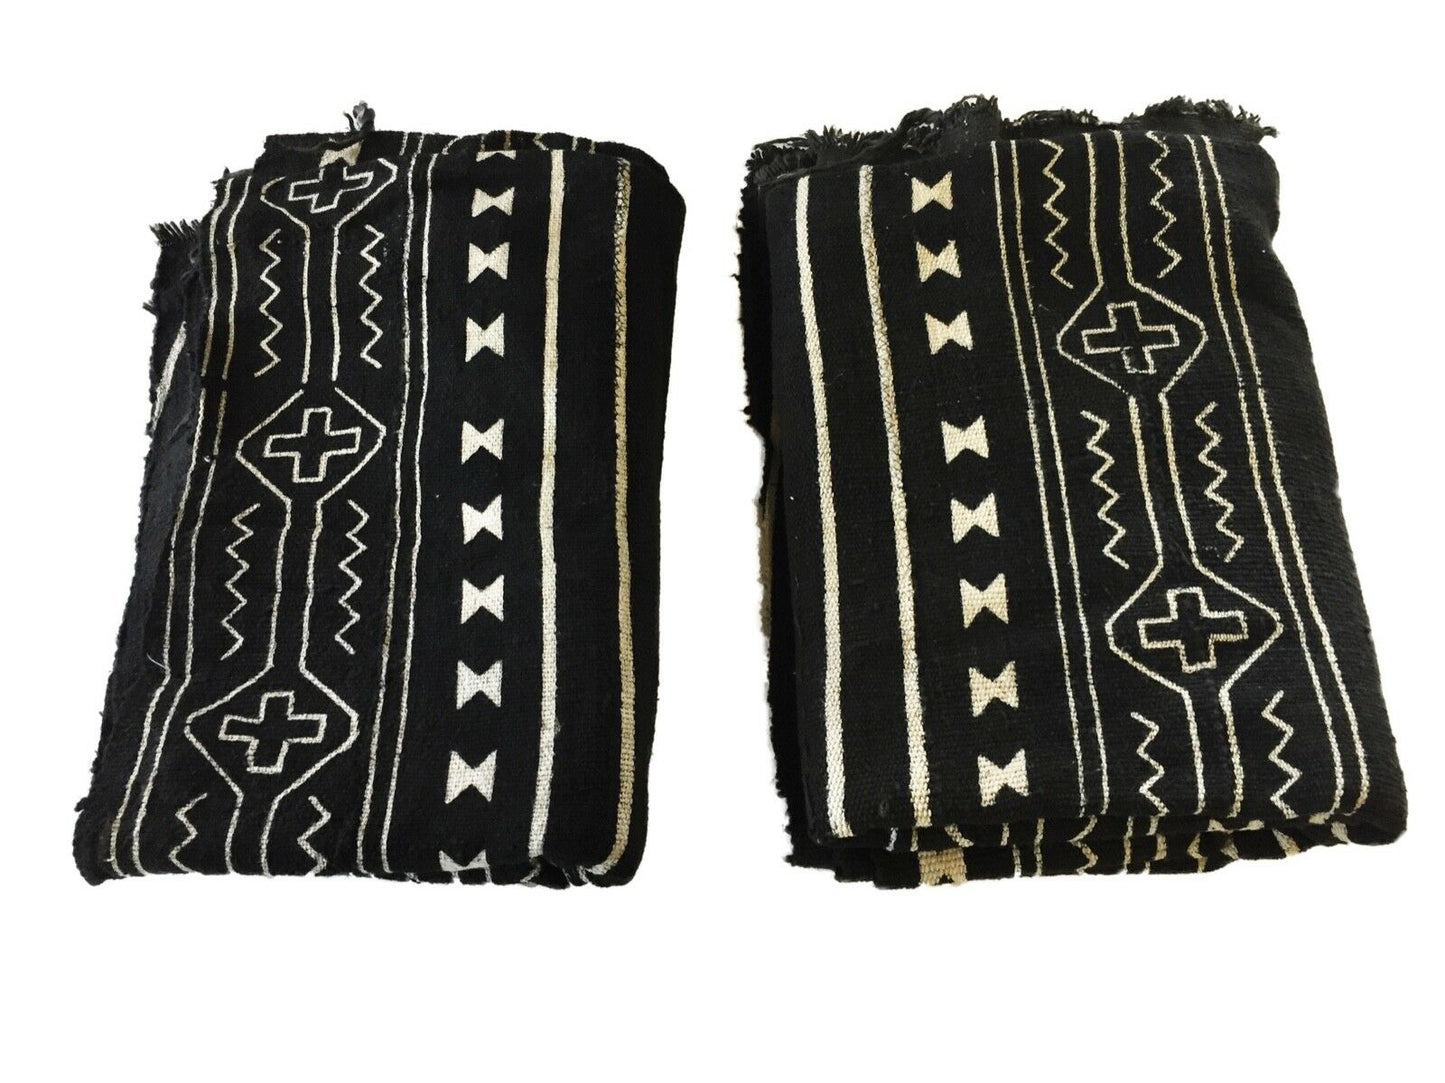 African Mali Black and White Mud Cloth Textile / PAIR 64" by 45.5" Pair # 1839